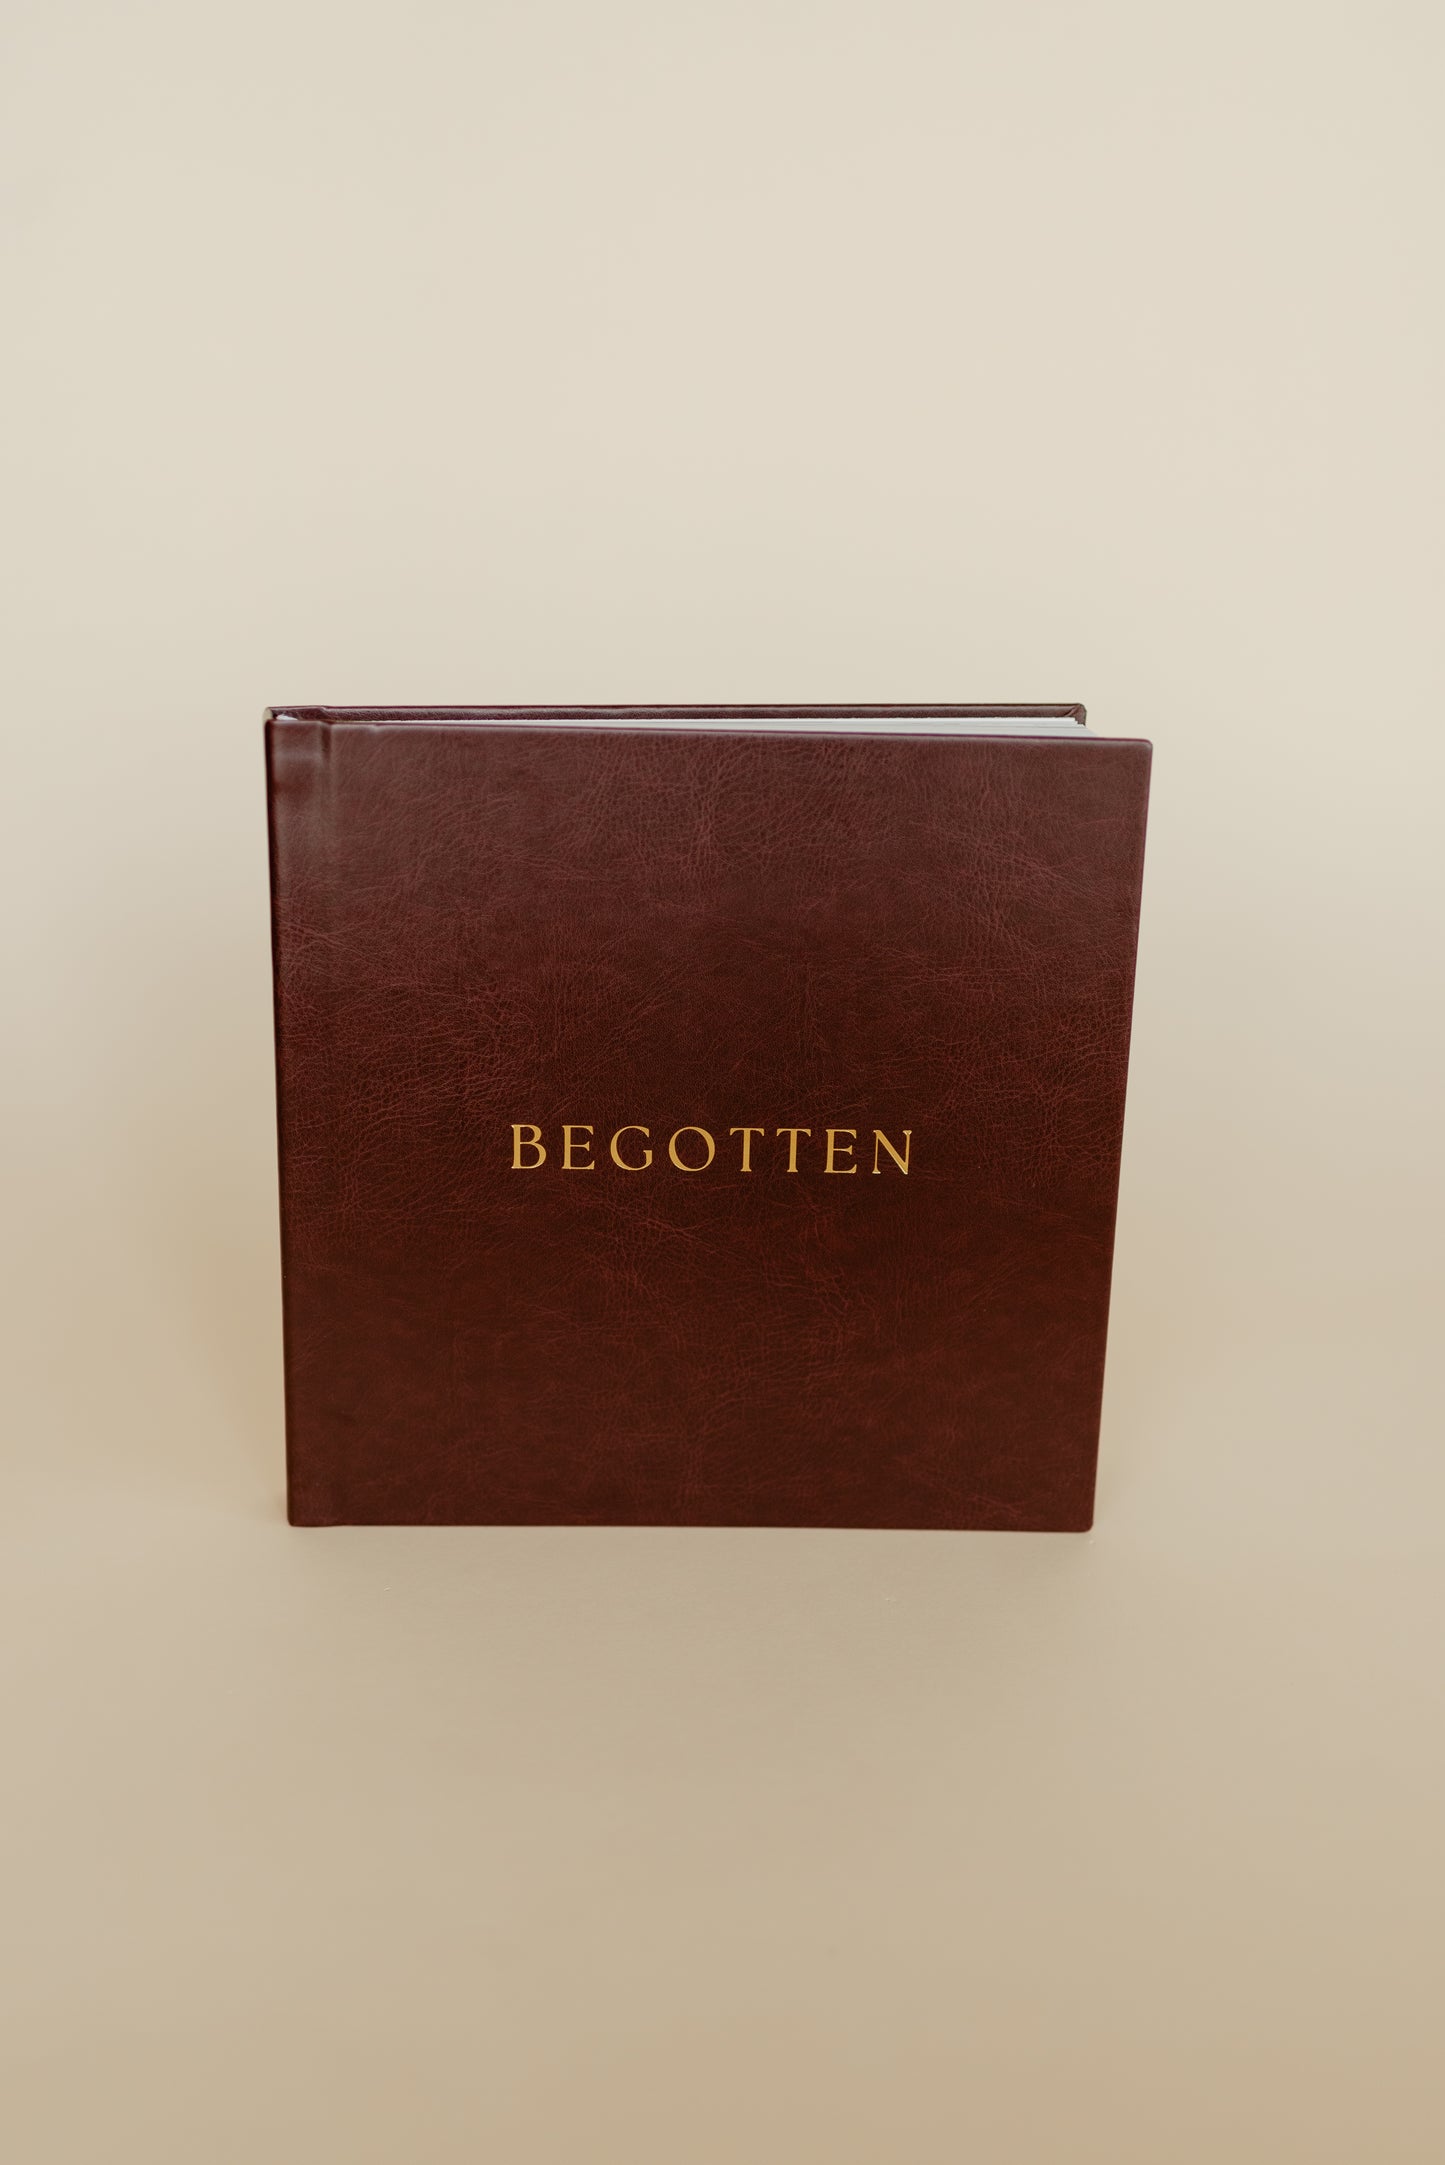 Begotten: Burgundy red leather coffee table book for Christmas